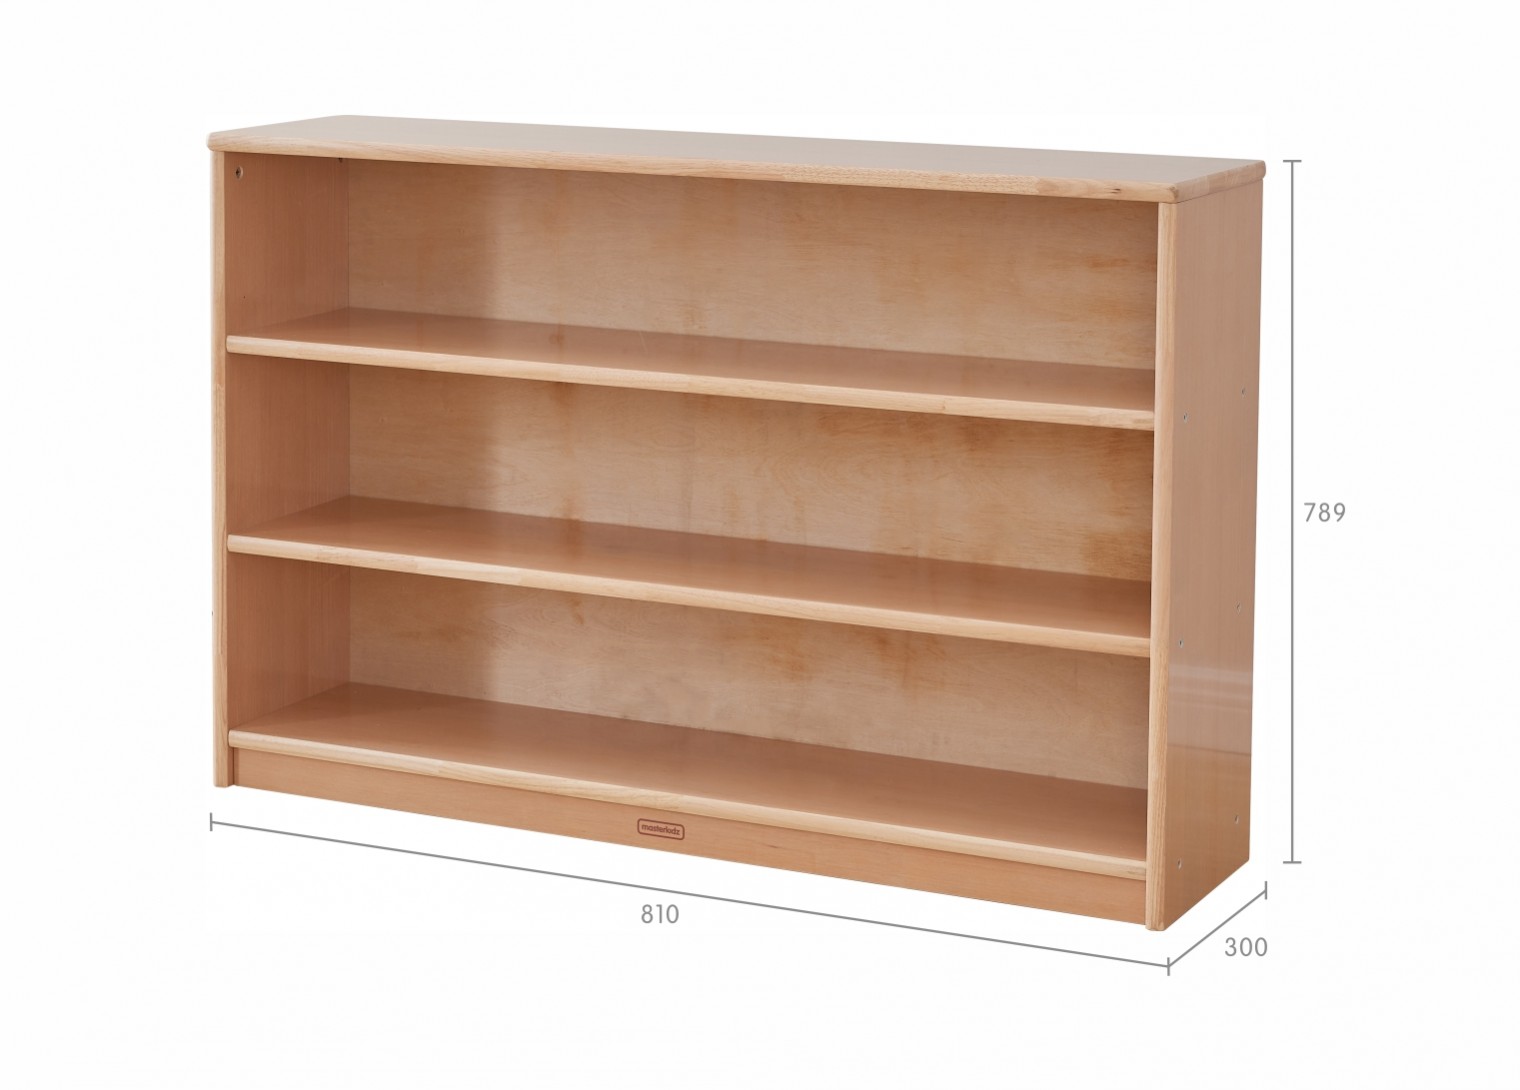 Forest School - 789H x 1210L Wooden  Shelving Unit - Plywood Back